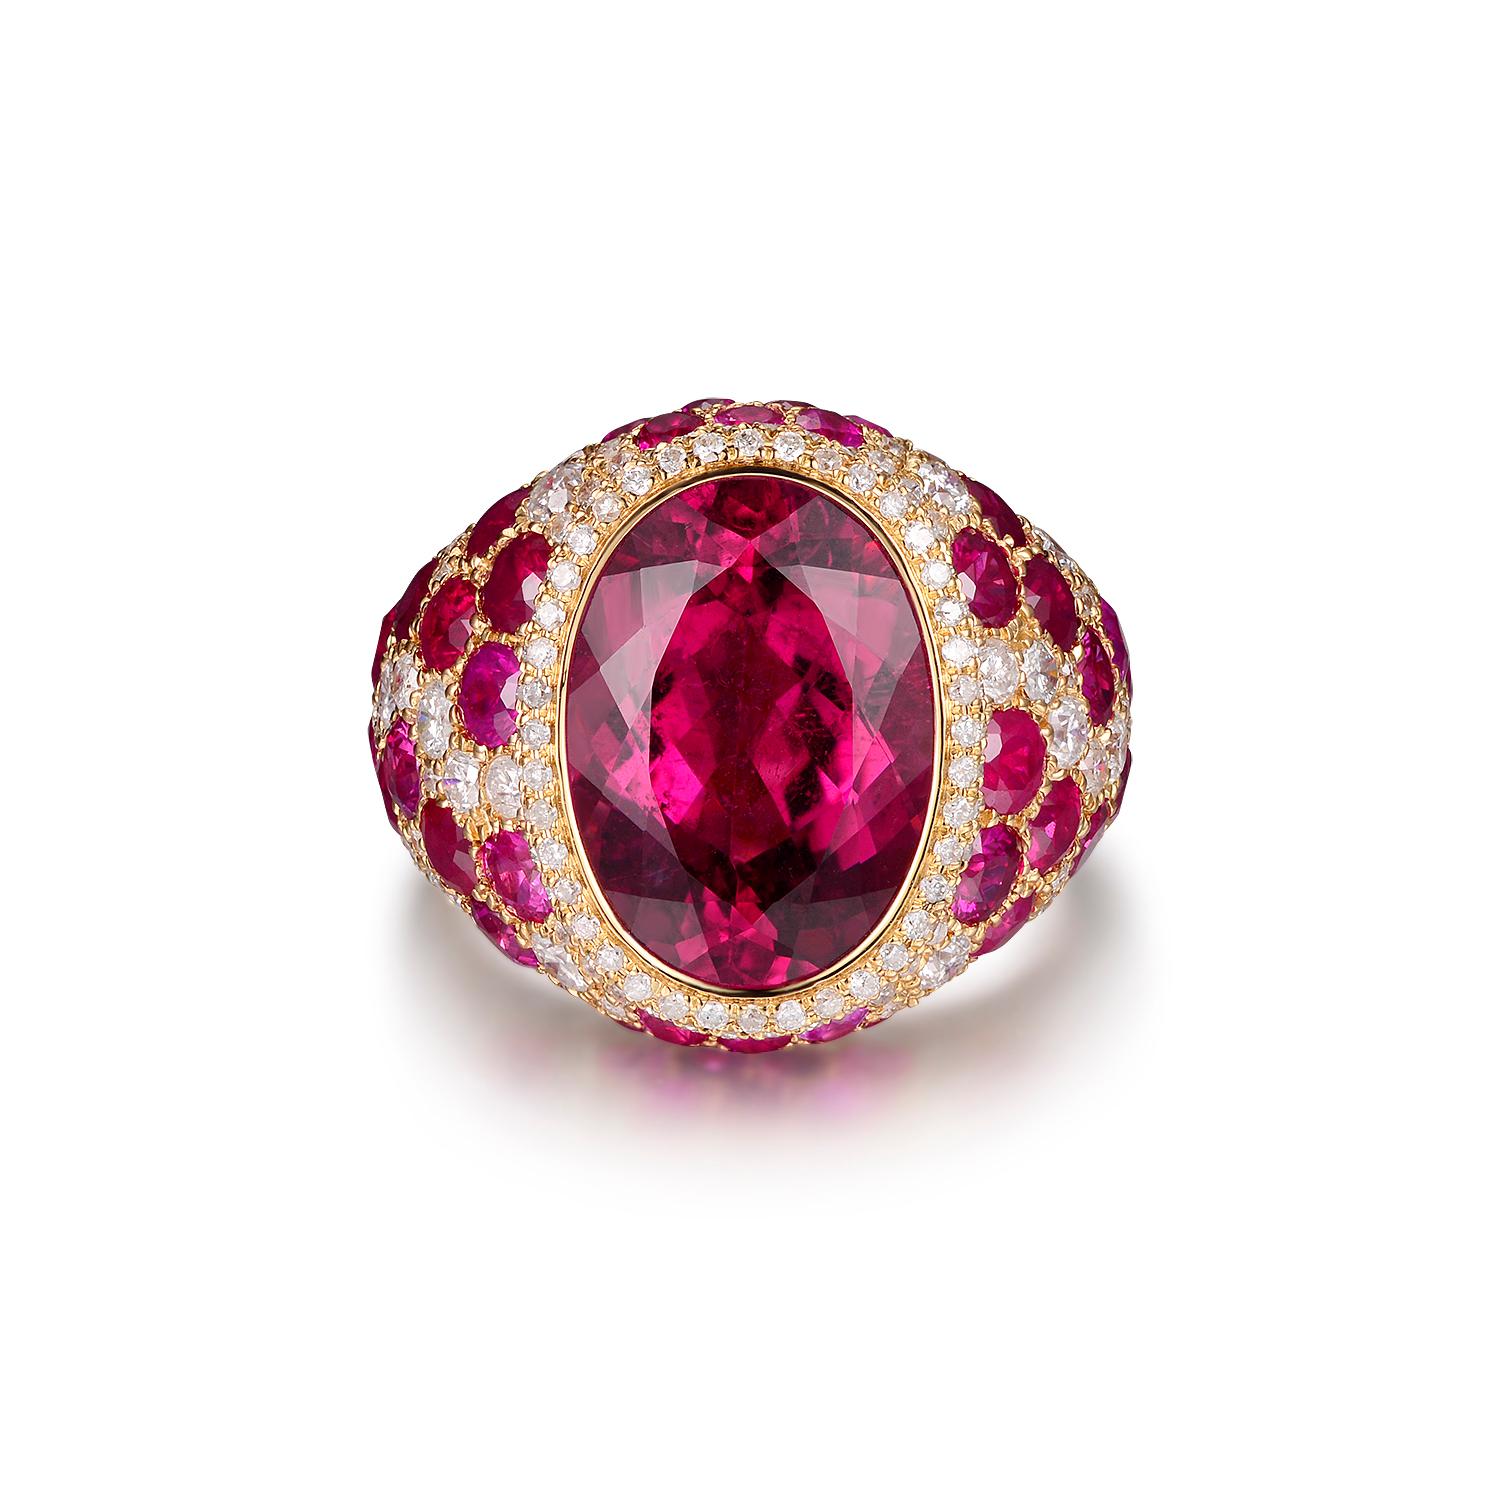 This exquisite ring features a 6.50 carats rubelite at the center, assented with 0.41 carat of diamonds on the diamond halo. For the body of the ring it features 3.61 carats of ruby and 1.54 carats of round diamonds.

US6.5 
Rubelite 6.5